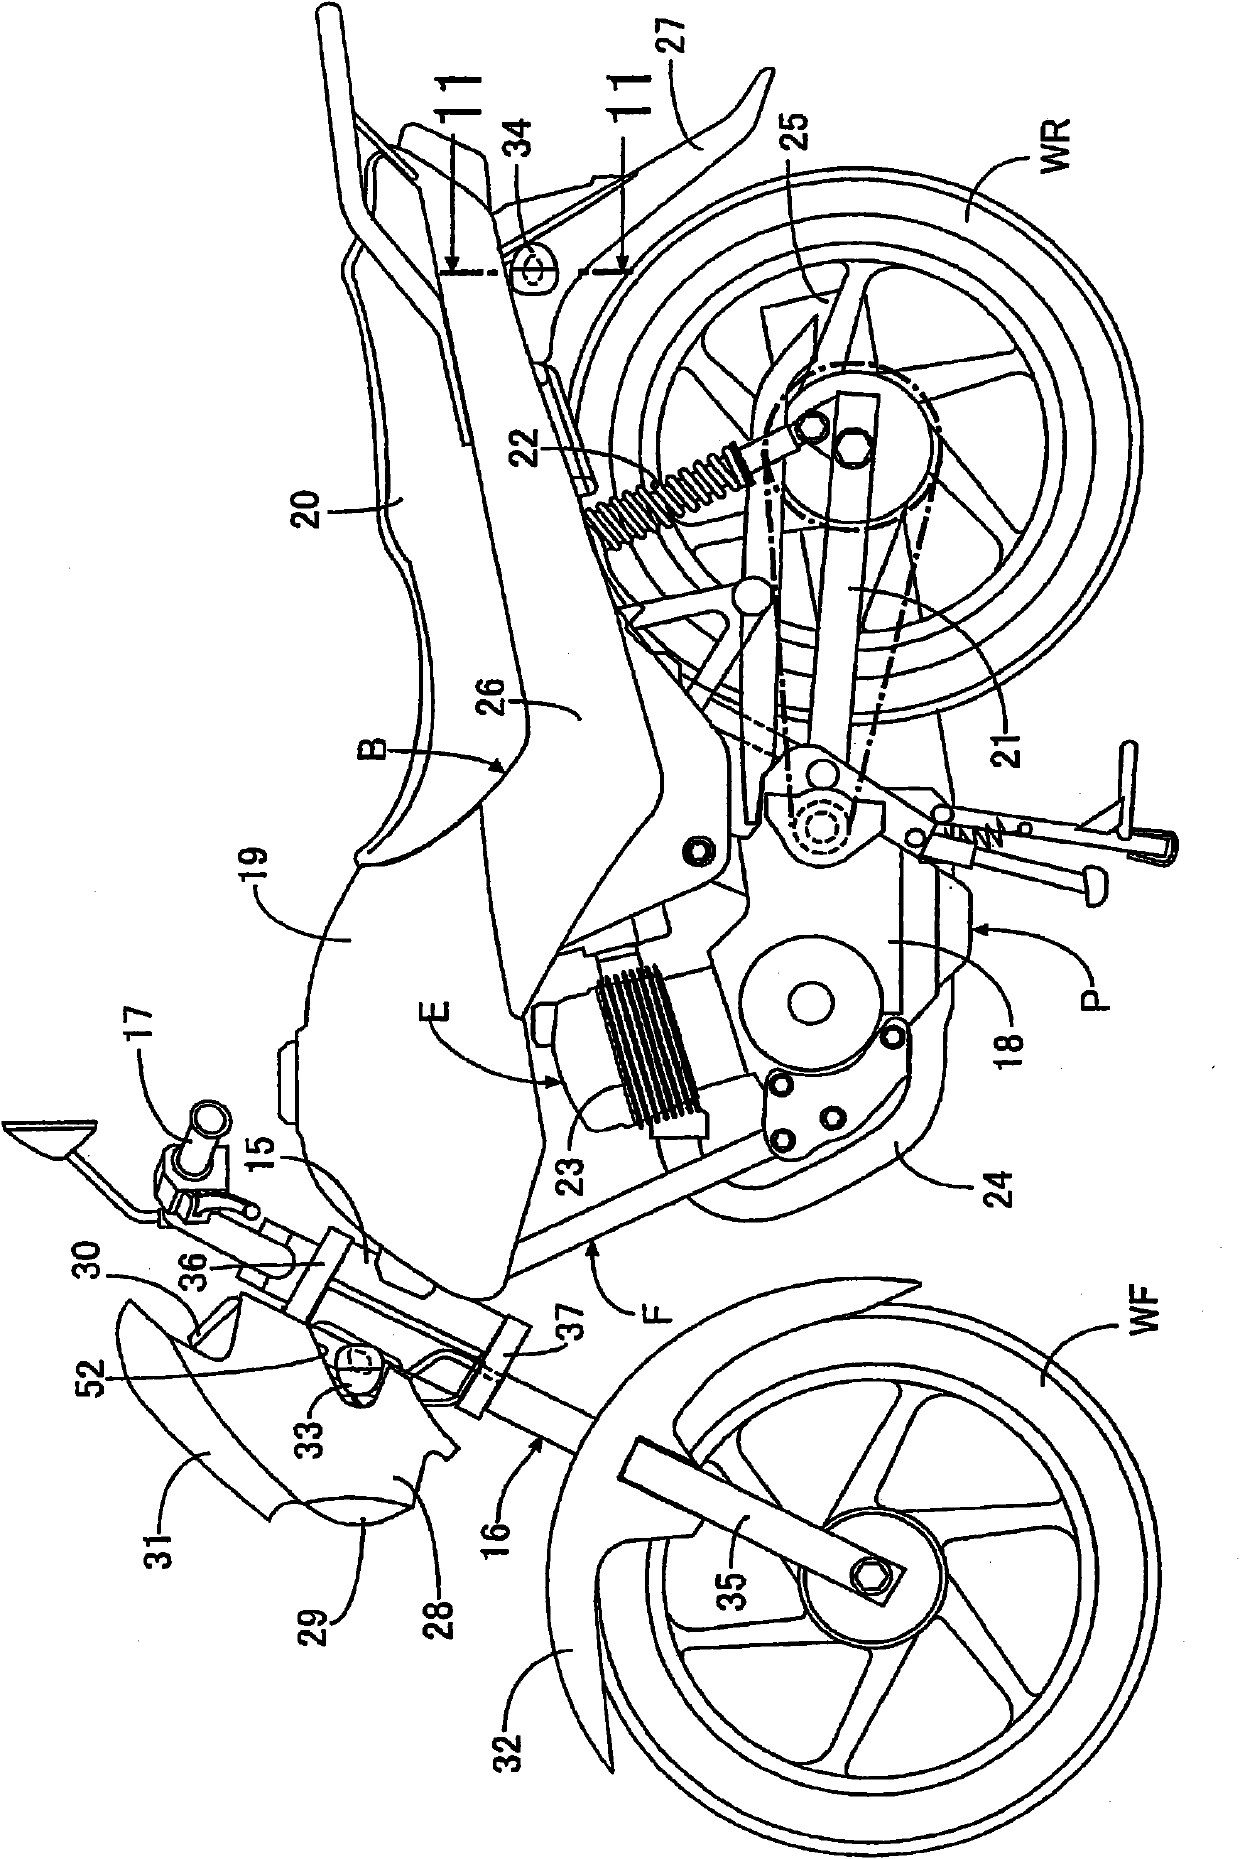 Direction indicator light mounting structure for engine driven cart